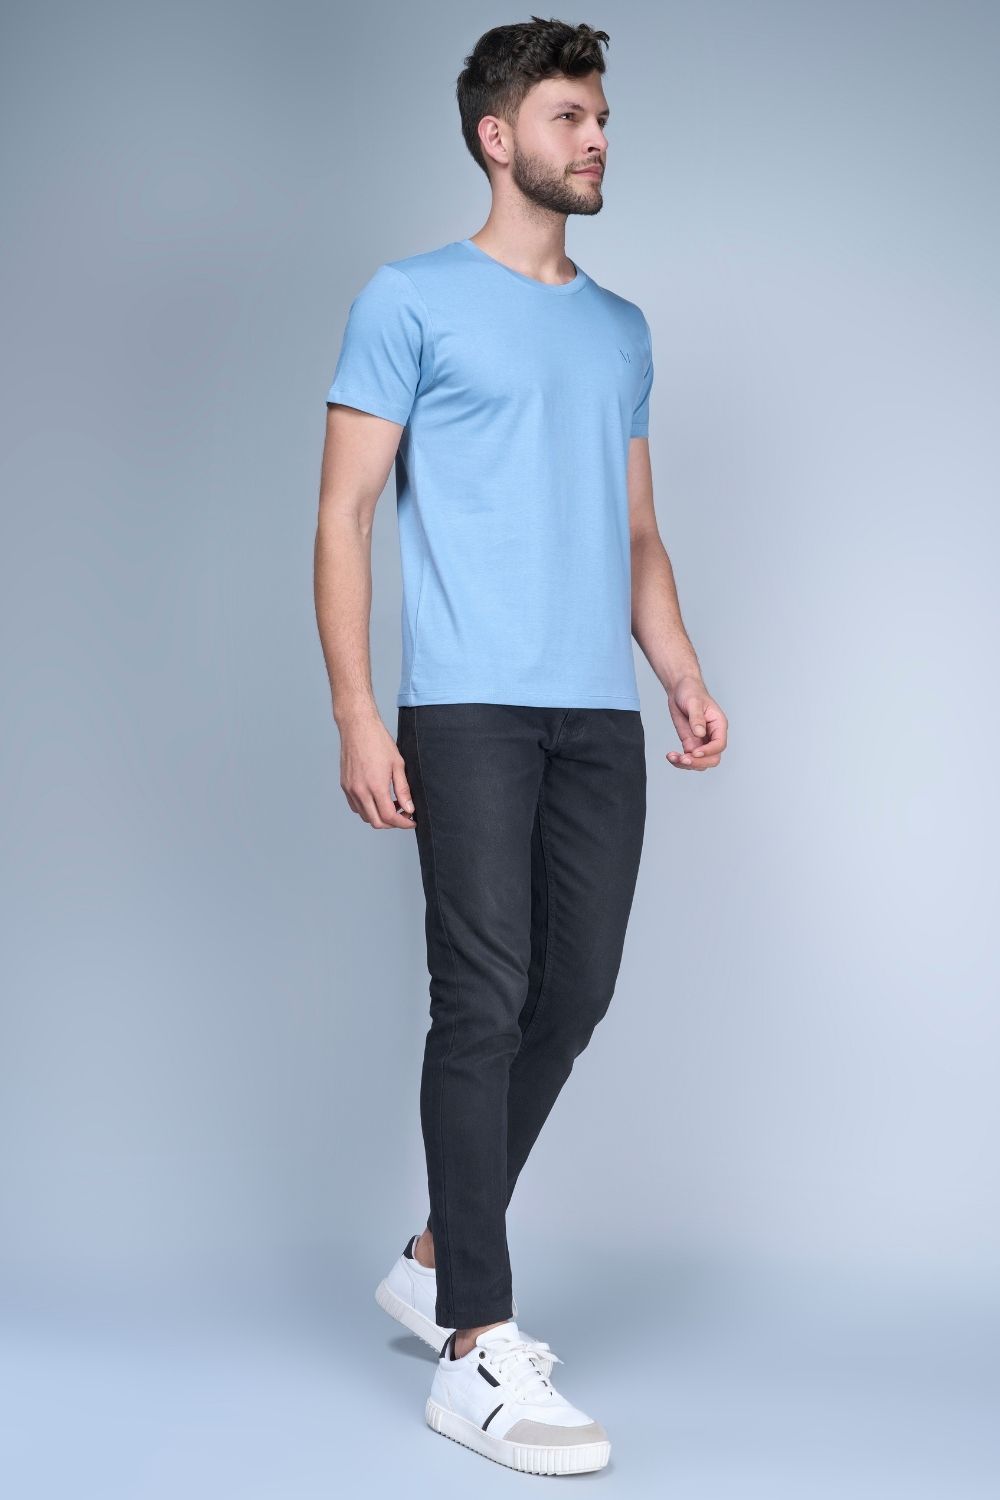 Sky Blue colored, Solid T shirt for men, with half sleeves and round neck, full view.